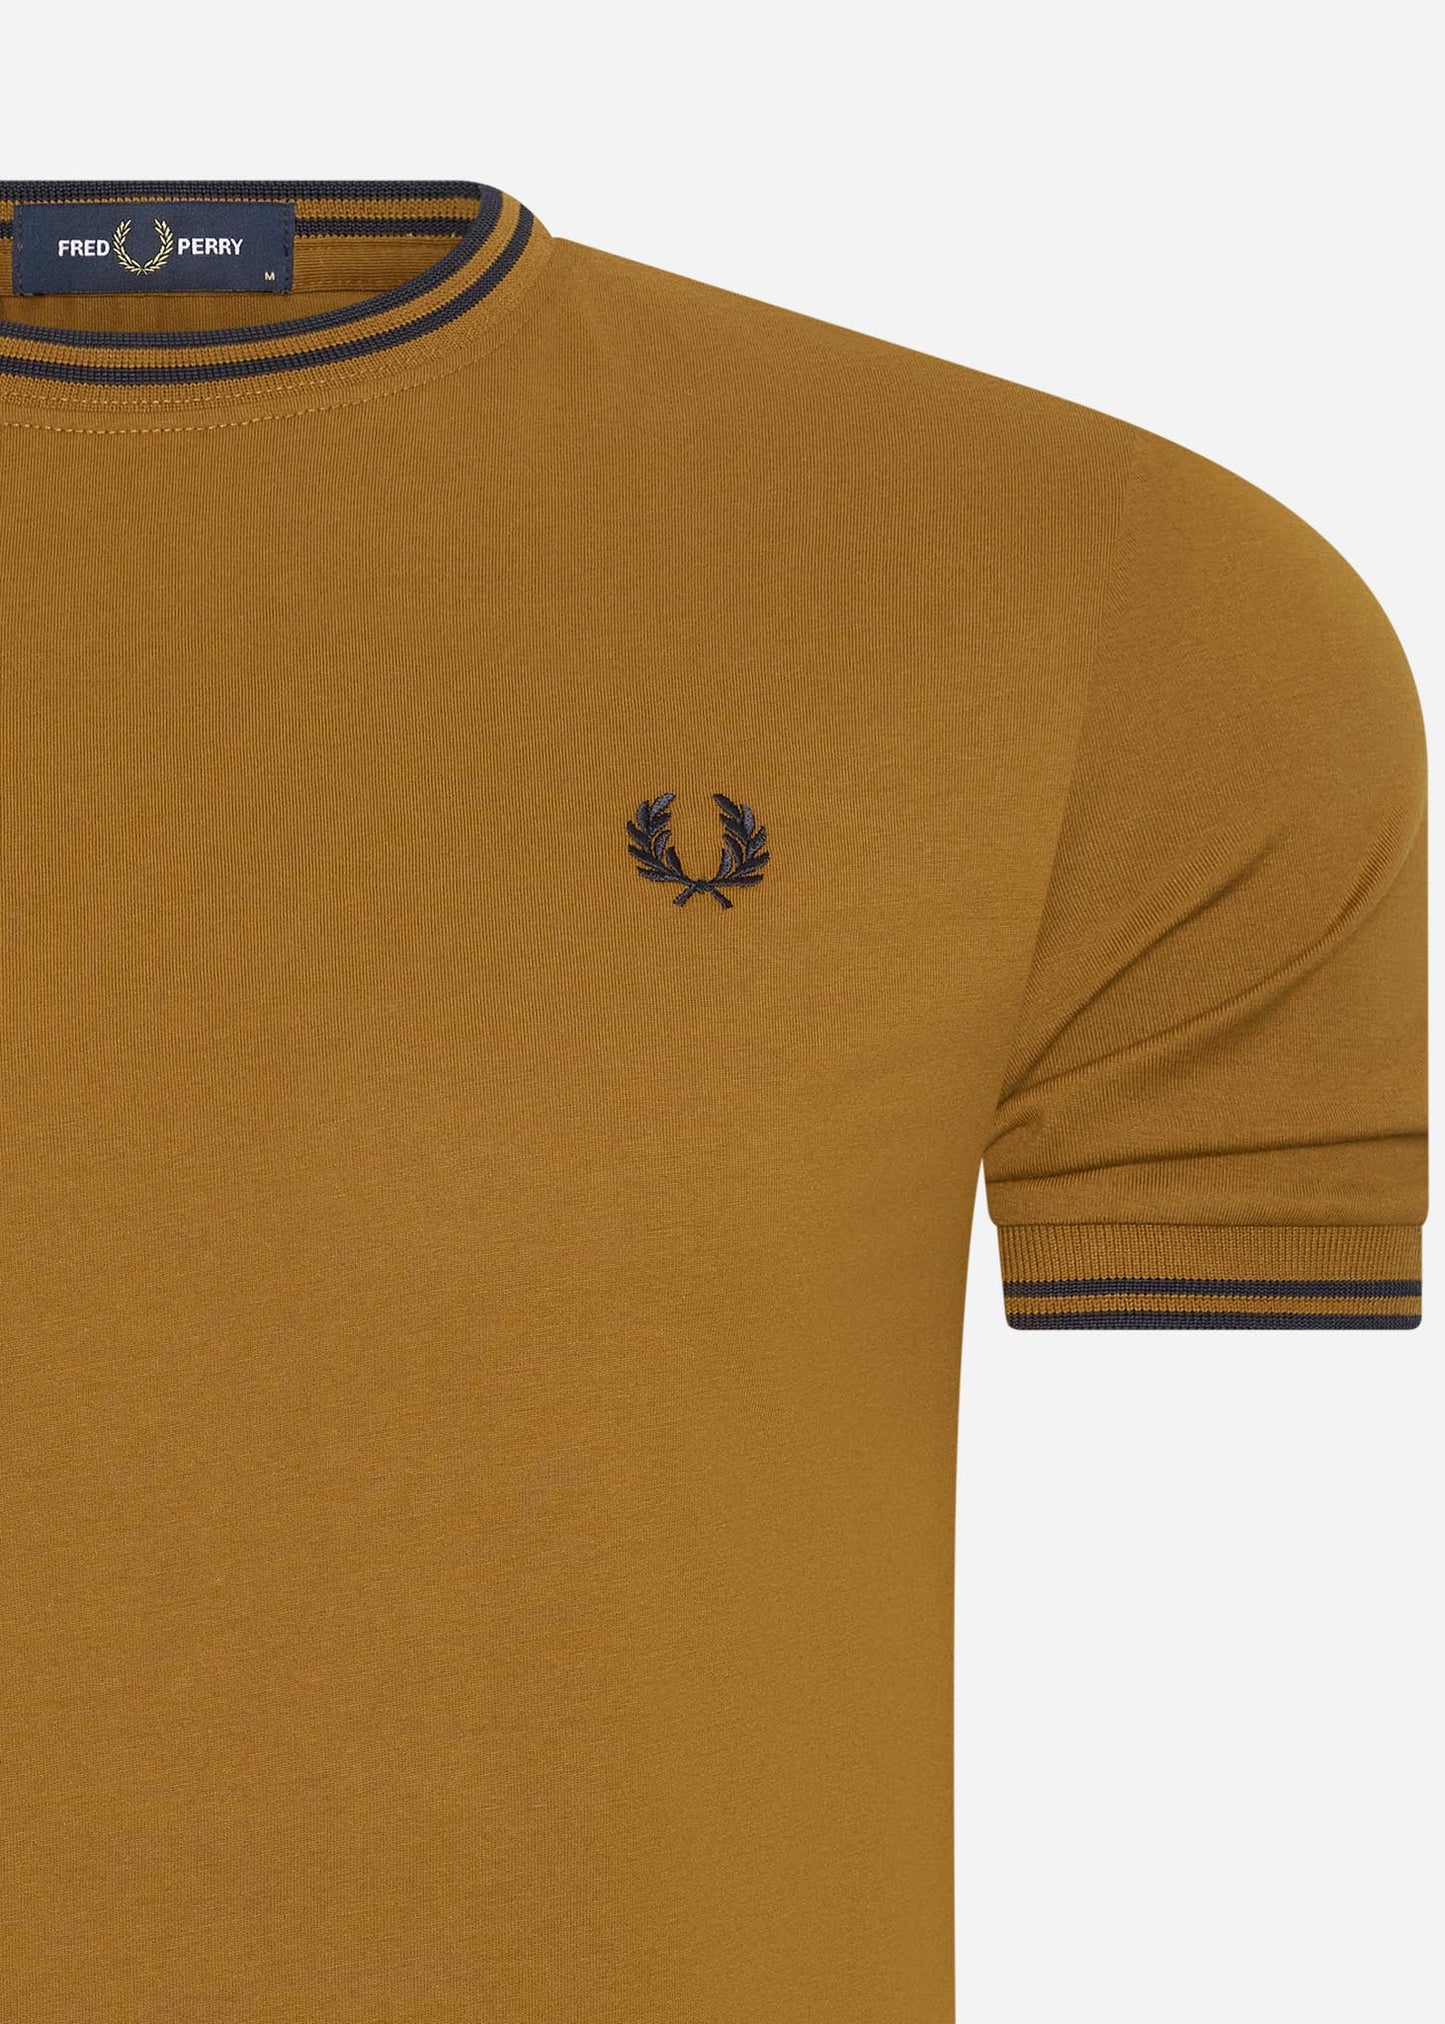 Fred Perry T-shirts  Twin tipped t-shirt - dark caramel 